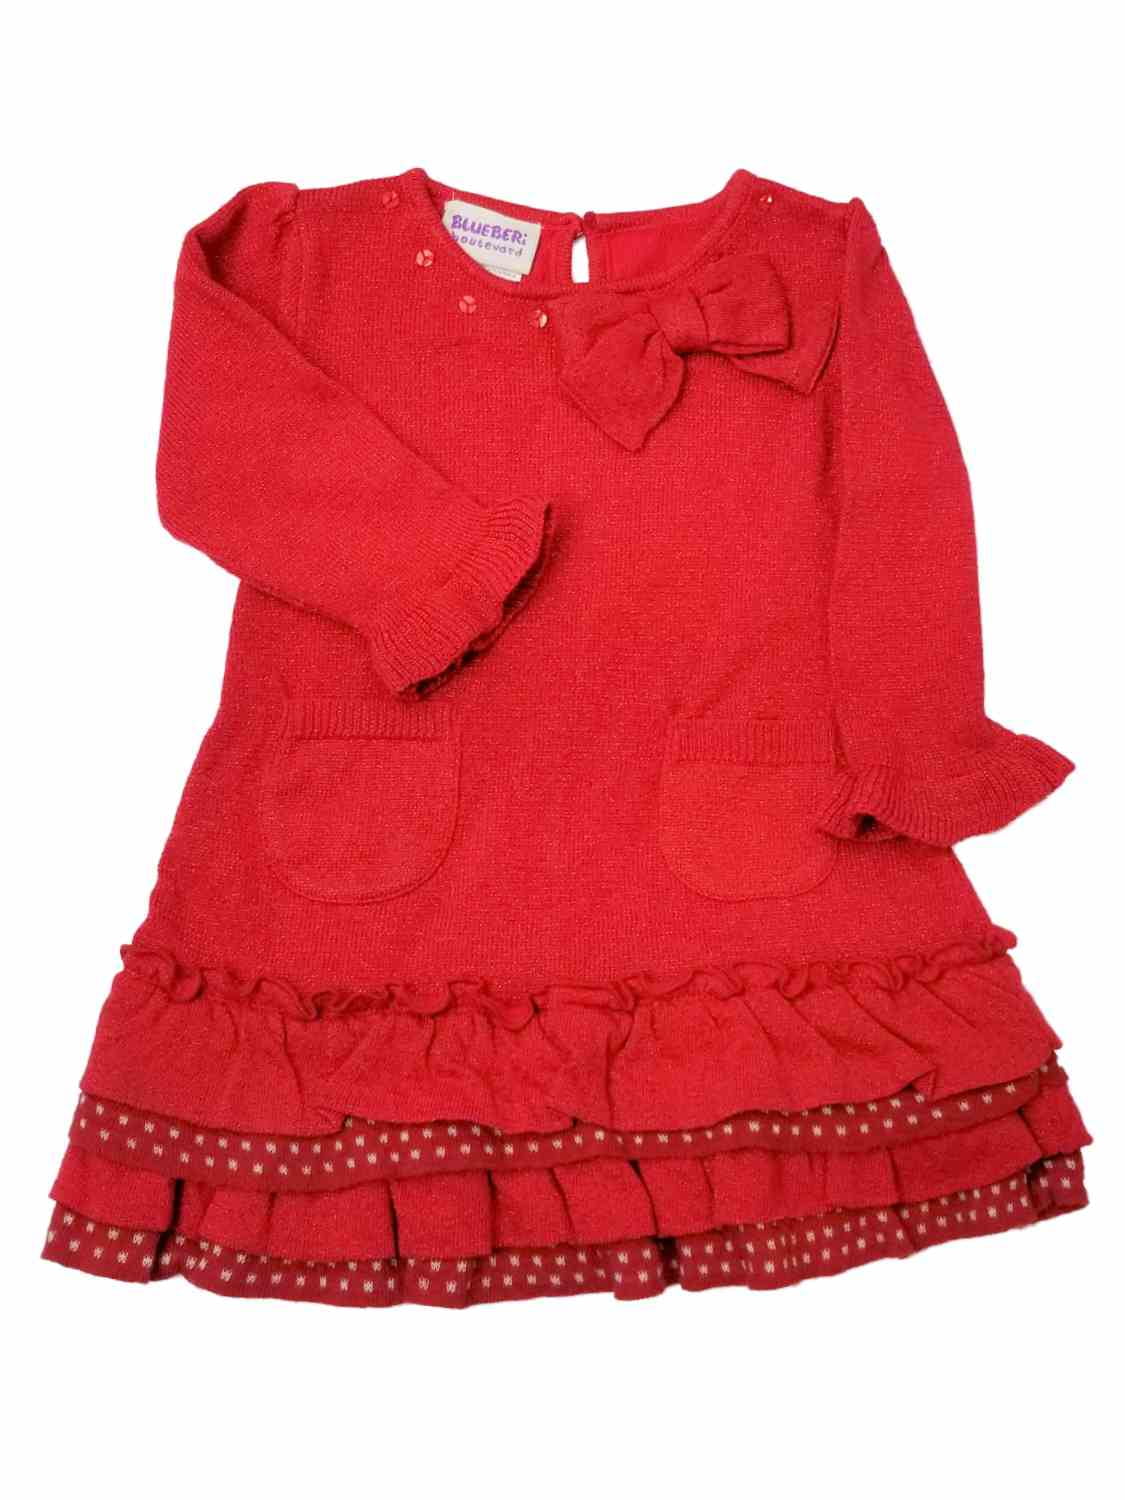 Details about   Infant Girls Red Sparkle Long Sleeve Knit Sweater Holiday Party Dress 0-3m 